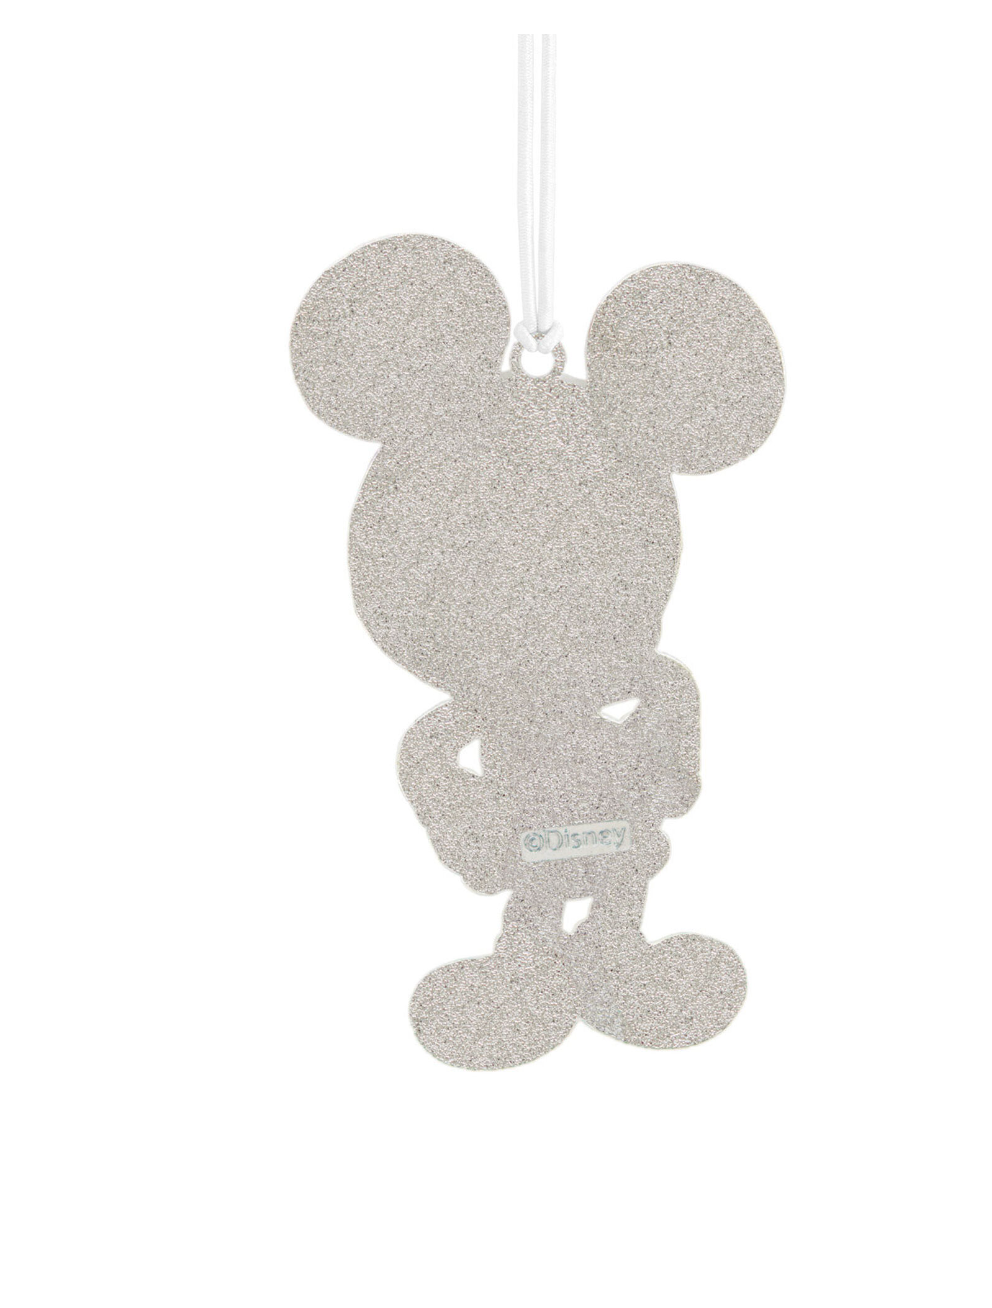 Hallmark Disney Mickey With Dimension Metal Christmas Ornament New with Card